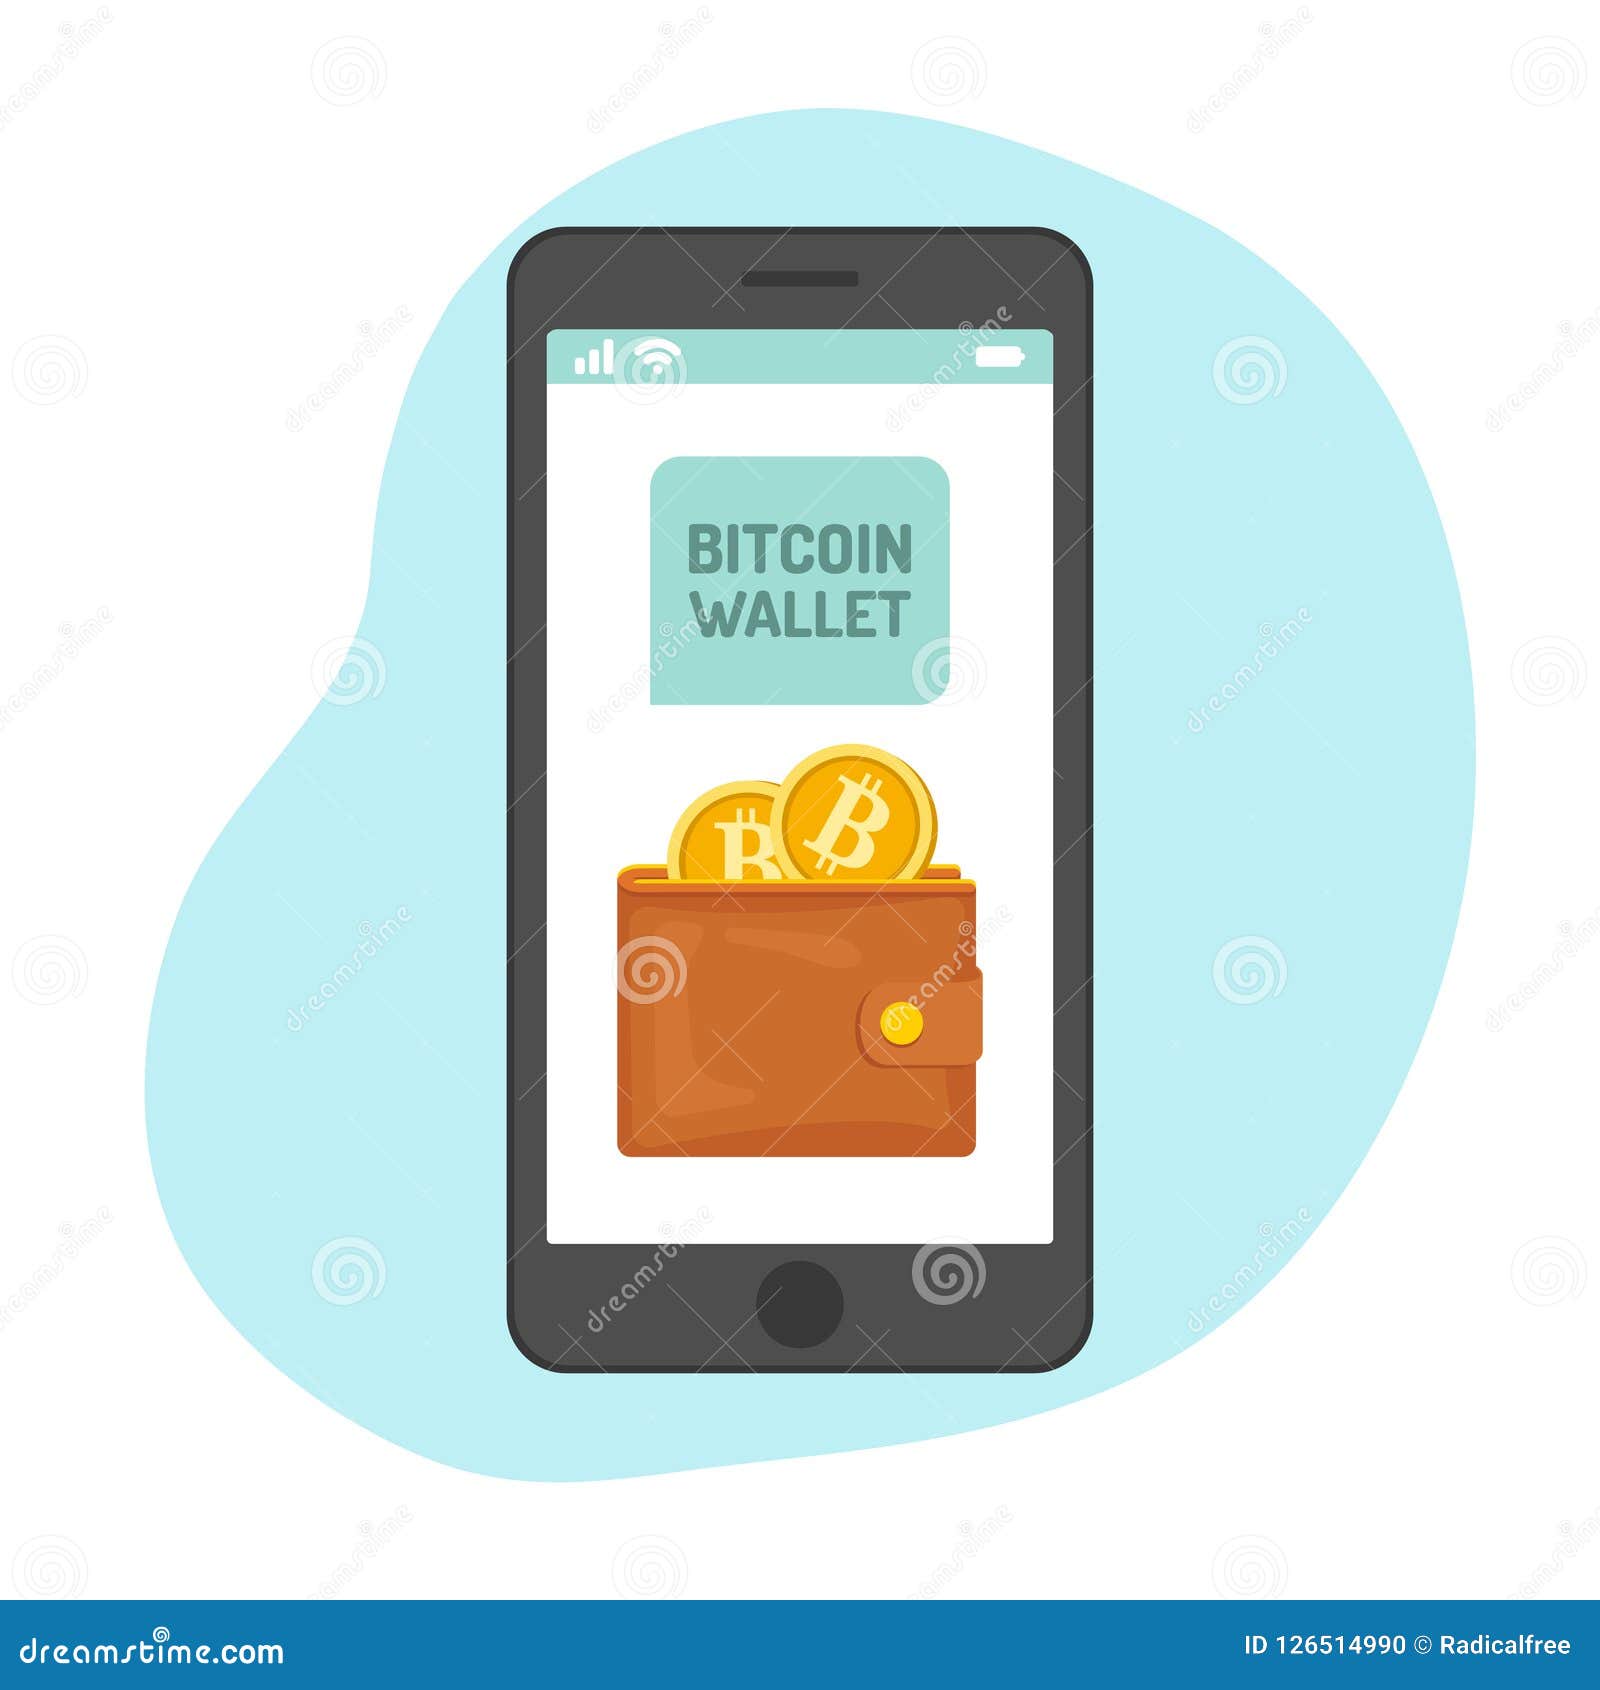 Bitcoin Wallet With Golden Coins In Smartphone Vector Illustration - 